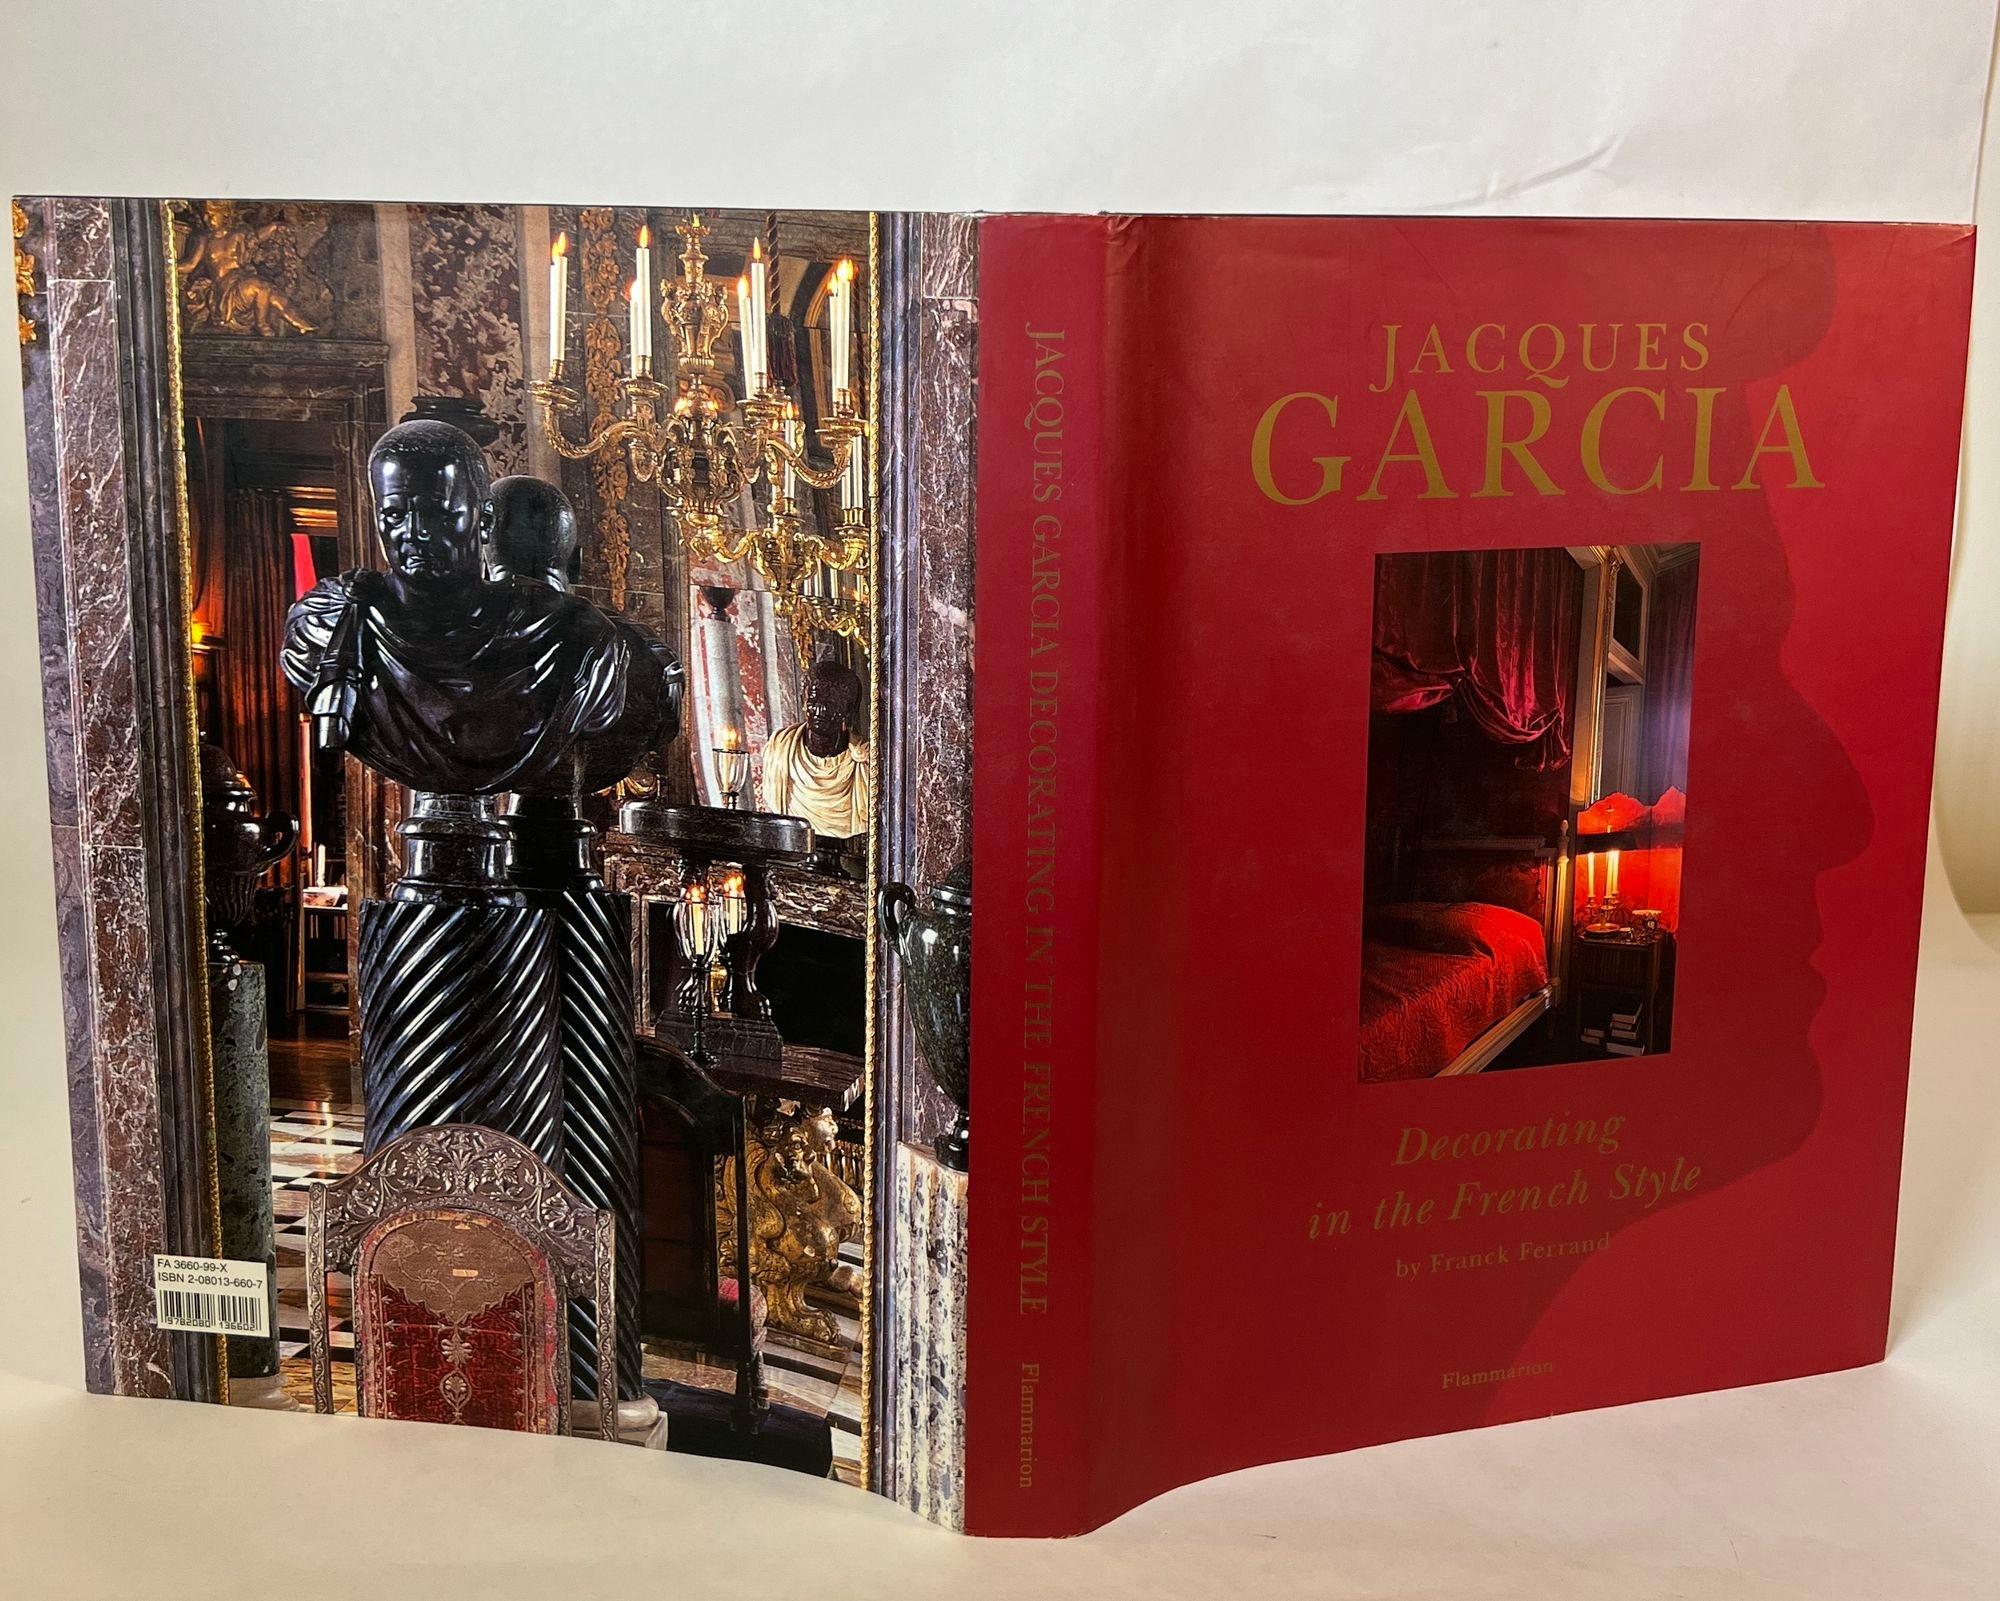 Baroque Jacques Garcia Decorating In The French Style Book by Franck Ferrand 1999 For Sale